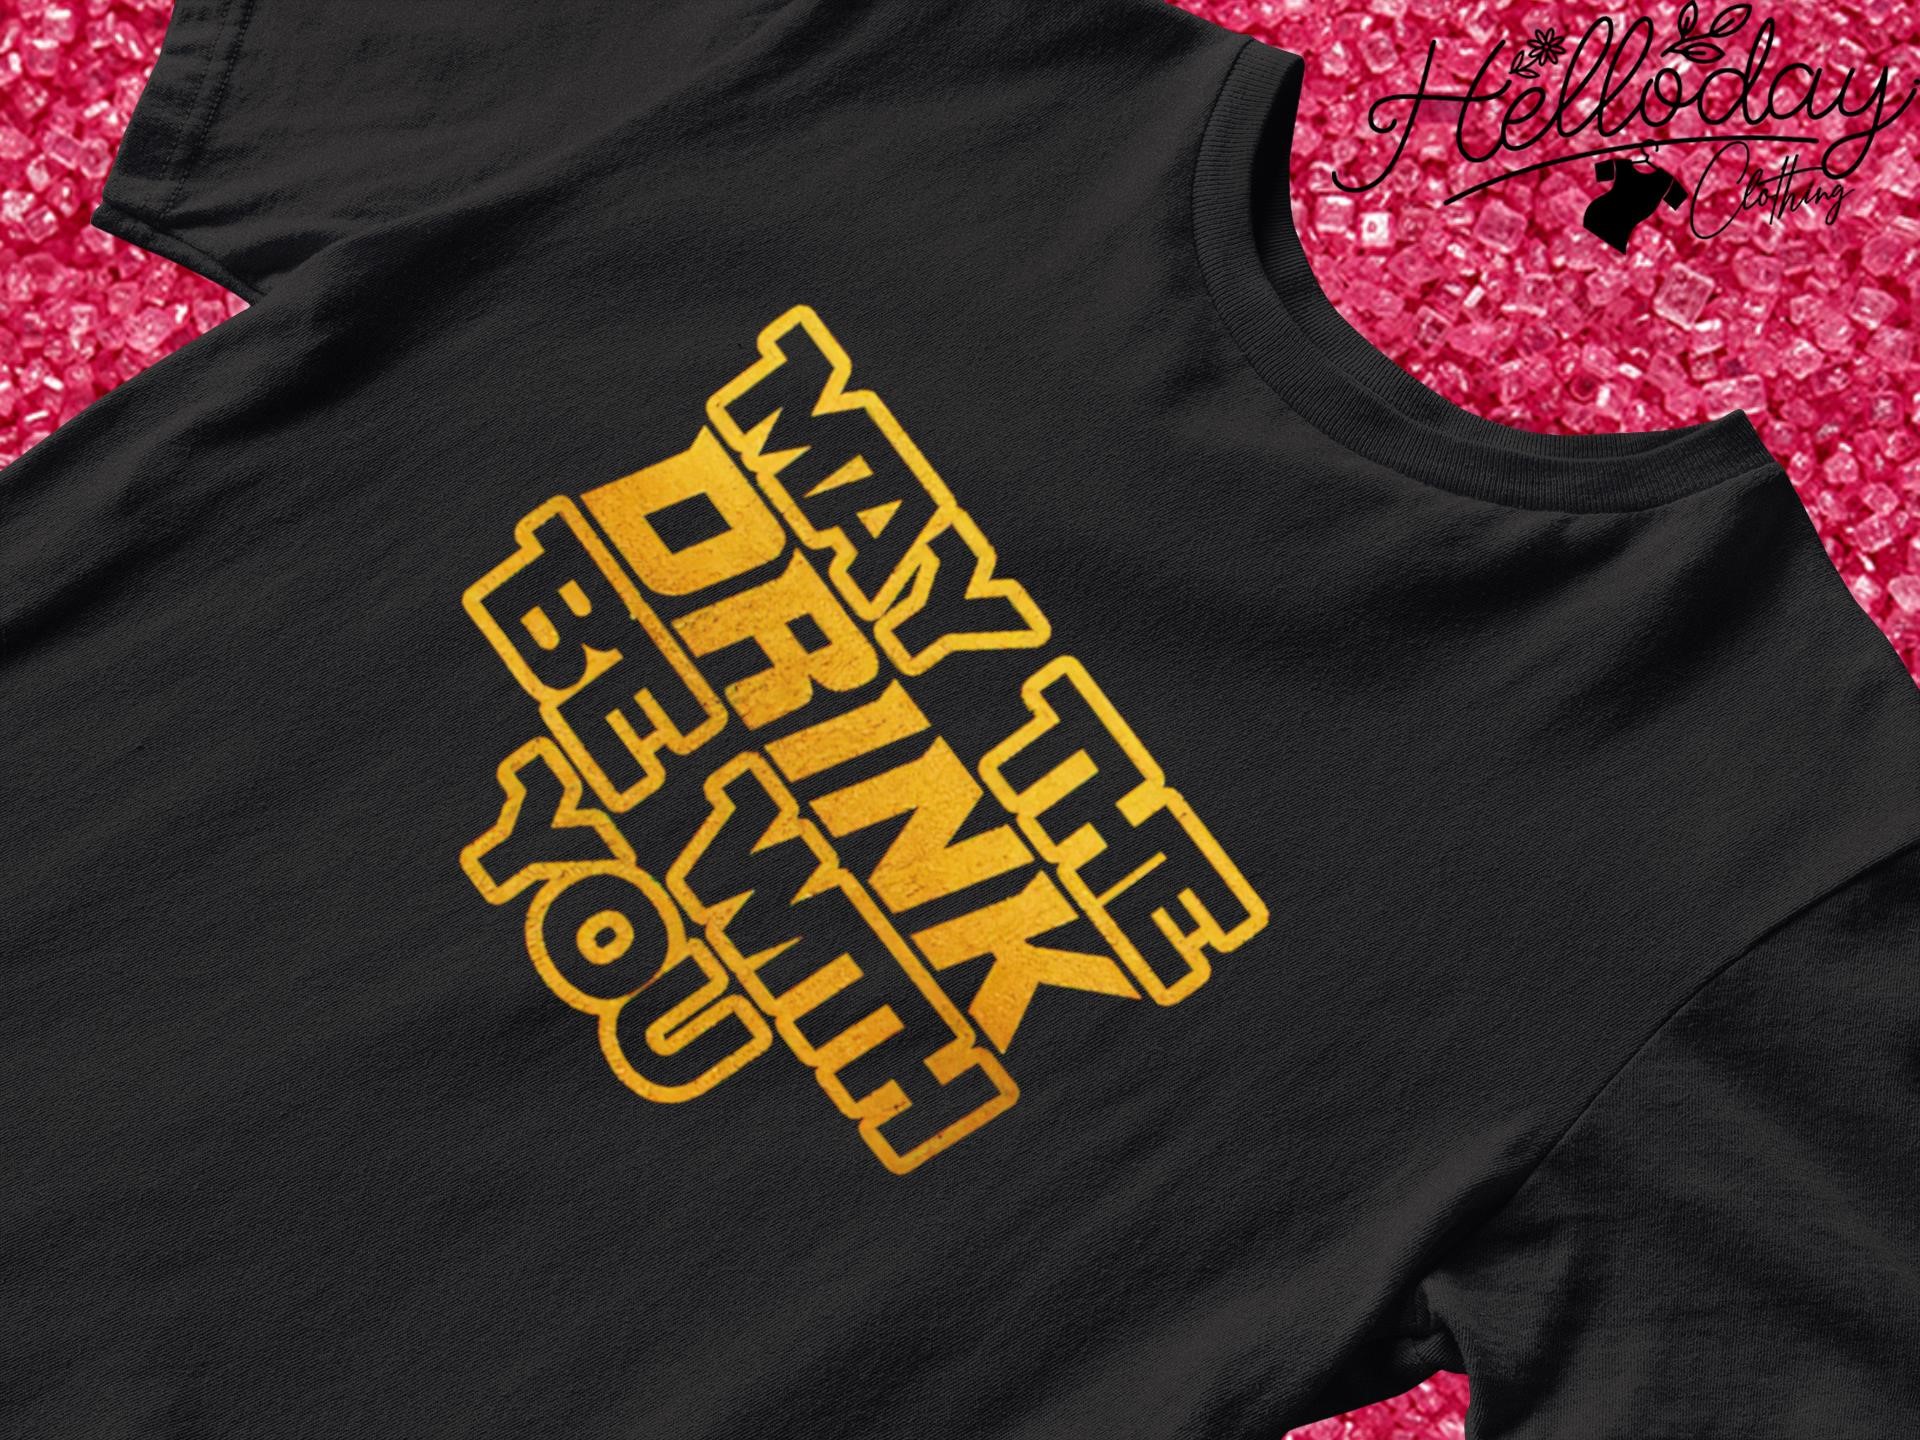 May the drink be with you shirt